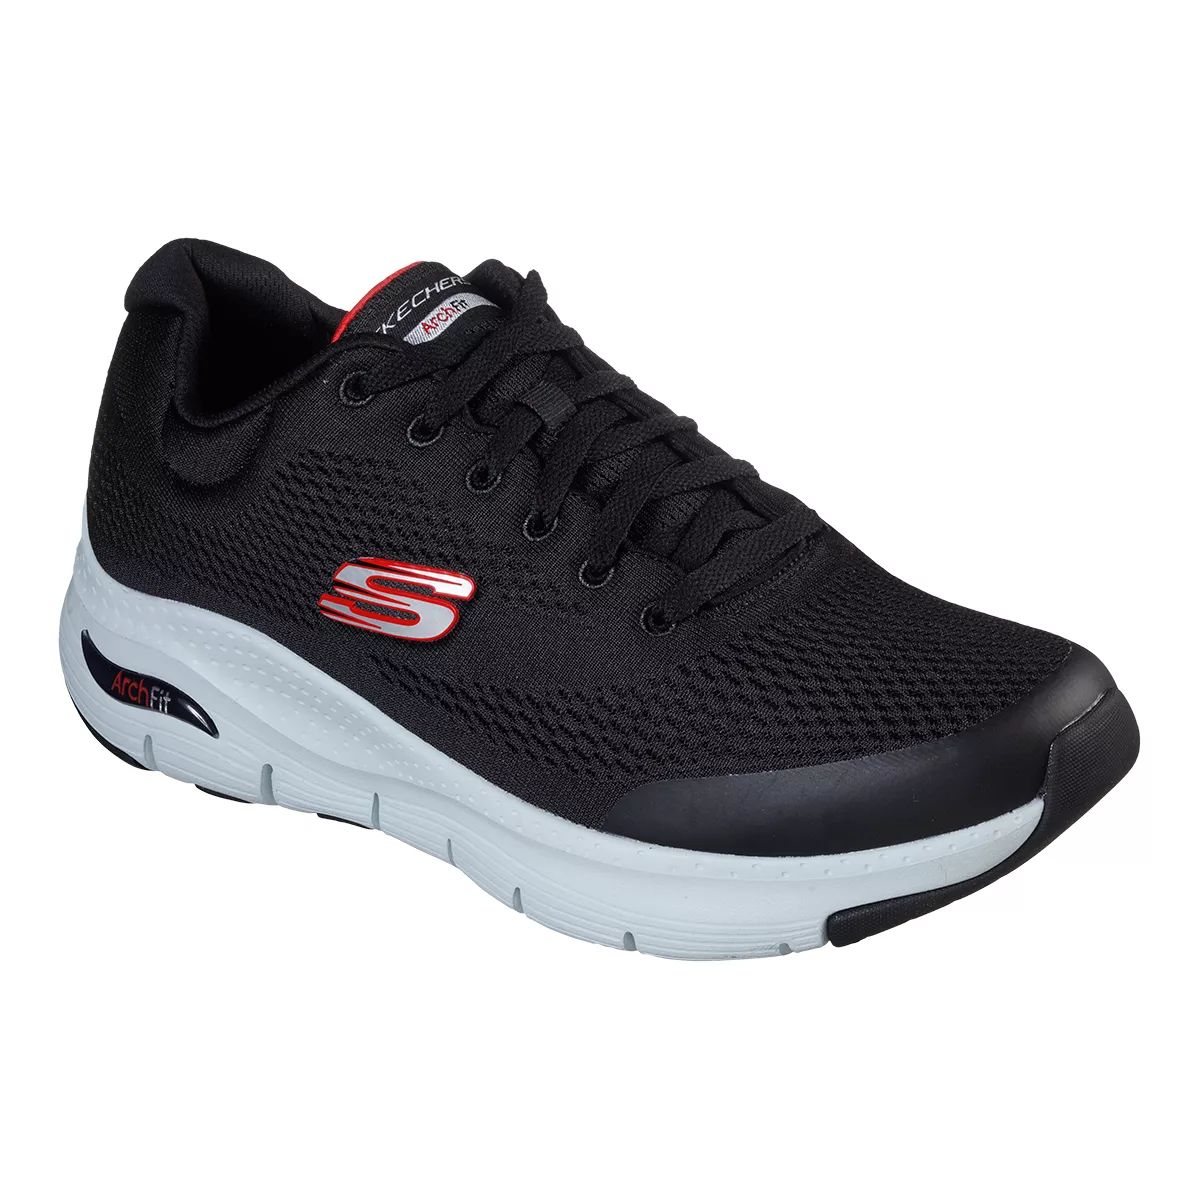 https://media-www.atmosphere.ca/product/div-05-footwear/dpt-80-footwear/sdpt-01-mens/333197295/skechers-archfit-black-textil-black-textile-red-8--8b1e7a53-8840-480f-9bc0-a33ee4ea45cf-jpgrendition.jpg?imdensity=1&imwidth=1244&impolicy=mZoom